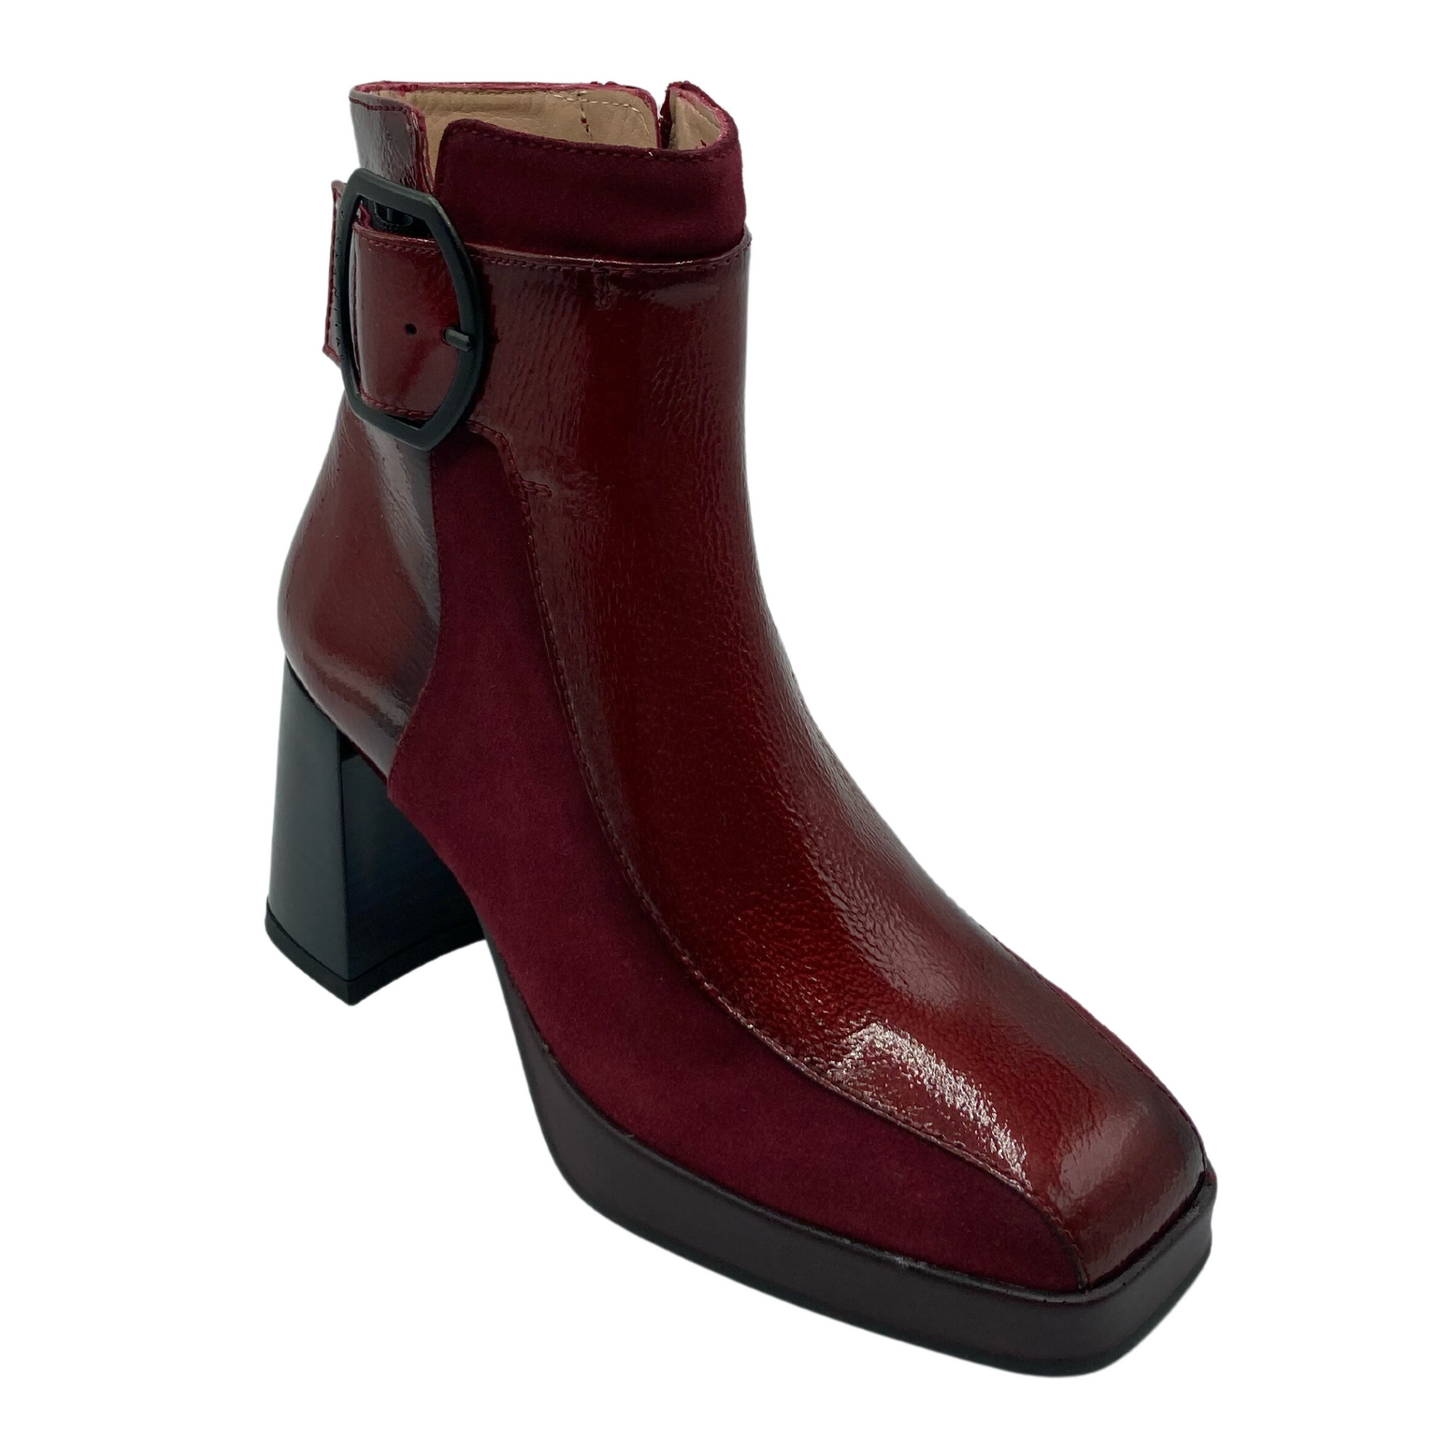 Angled view of chunky heeled leather boot with square toe